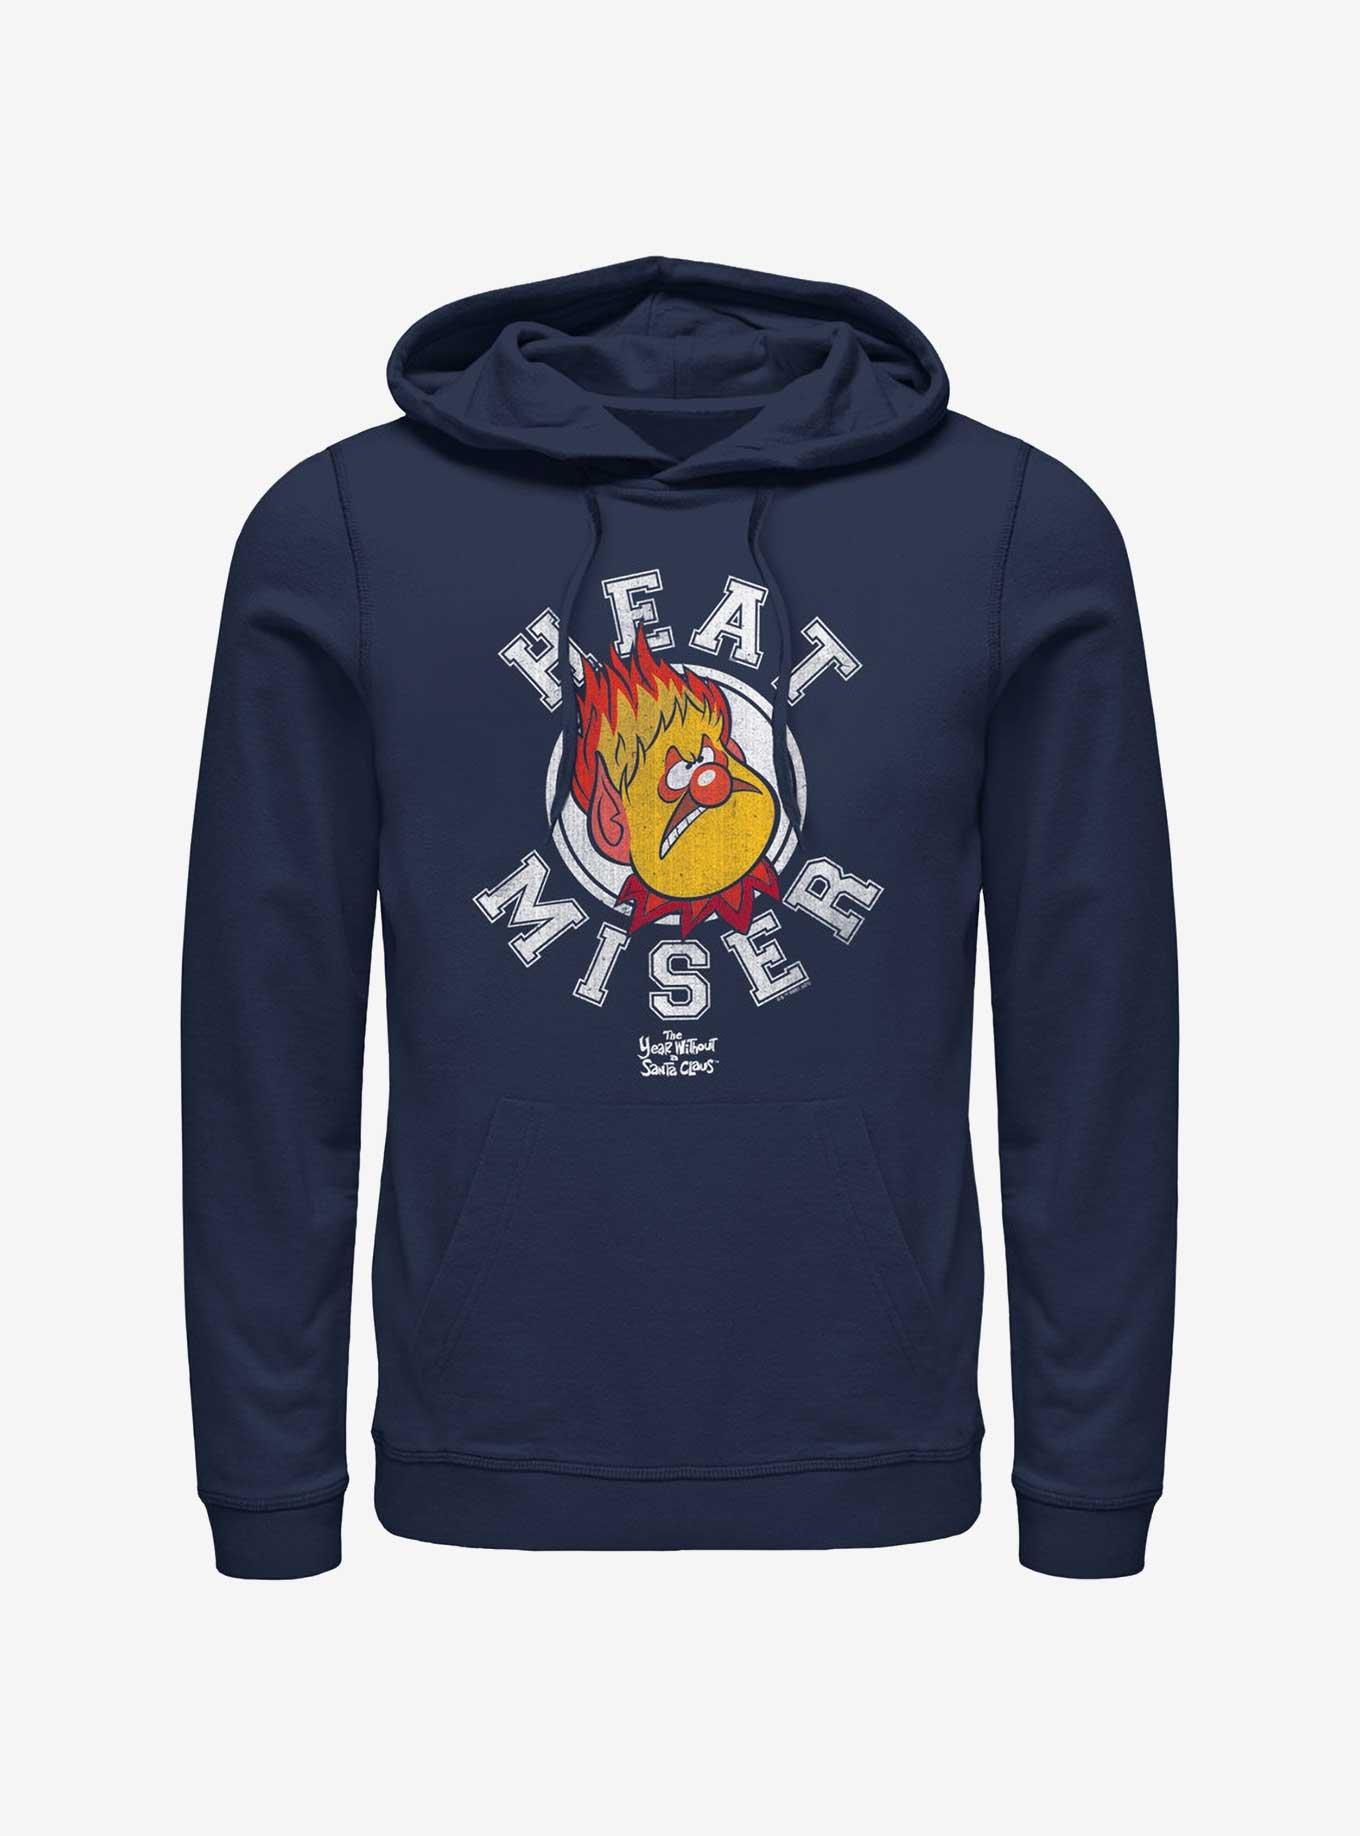 The Year Without a Santa Claus Heat Miser Collegiate Hoodie